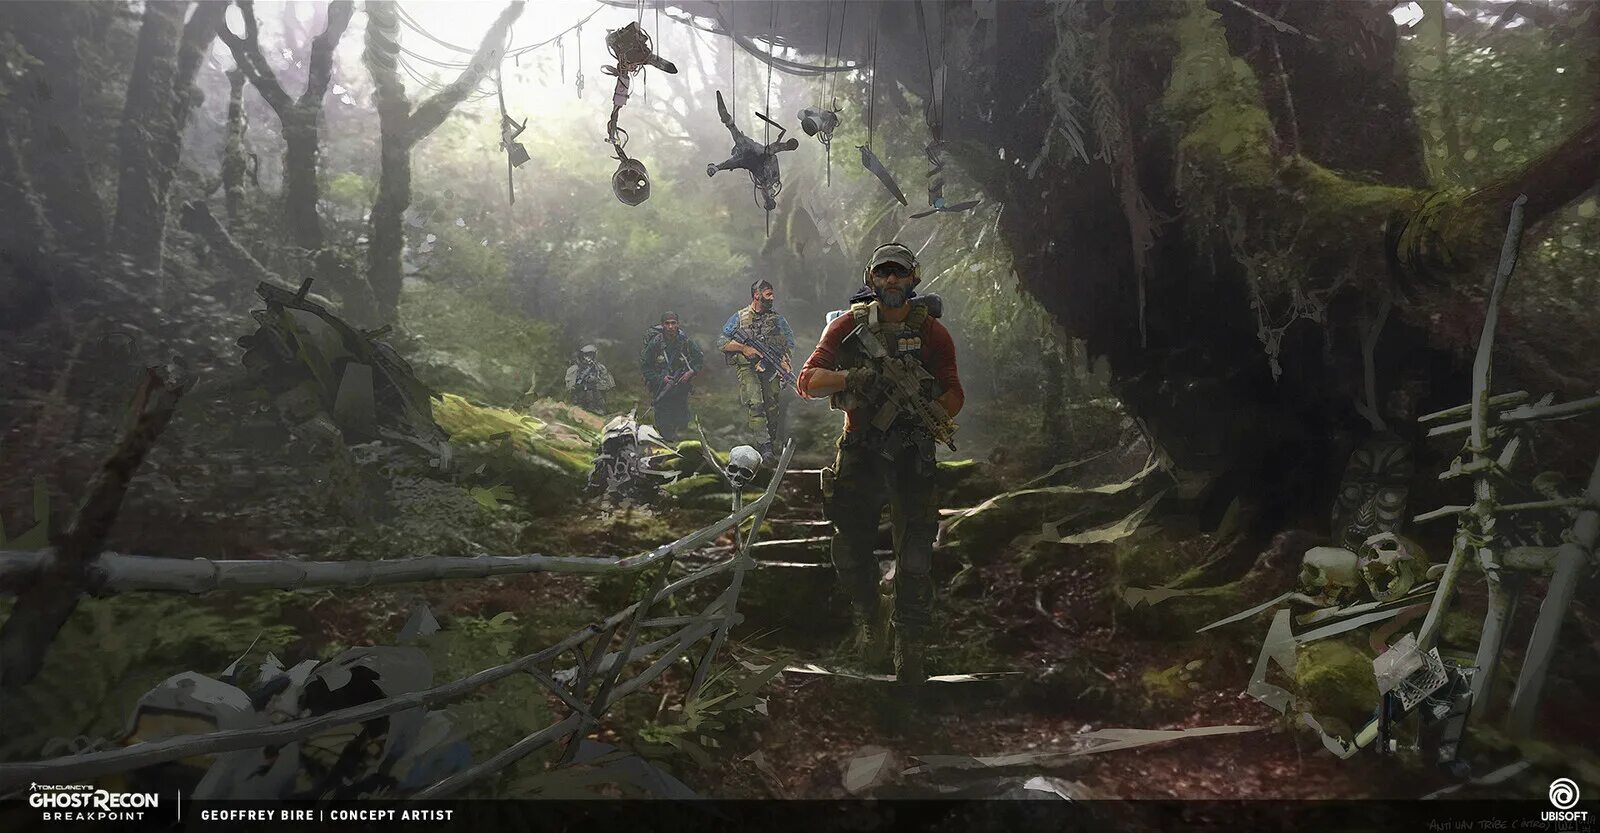 Overlord 3 1 ghost recon breakpoint. Ghost Recon Wildlands Concept Art. Tom Clancy's Ghost Recon Wildlands Art. Ghost Recon Wildlands концепт арт. Breakpoint Ghost Recon Concept Art остров.